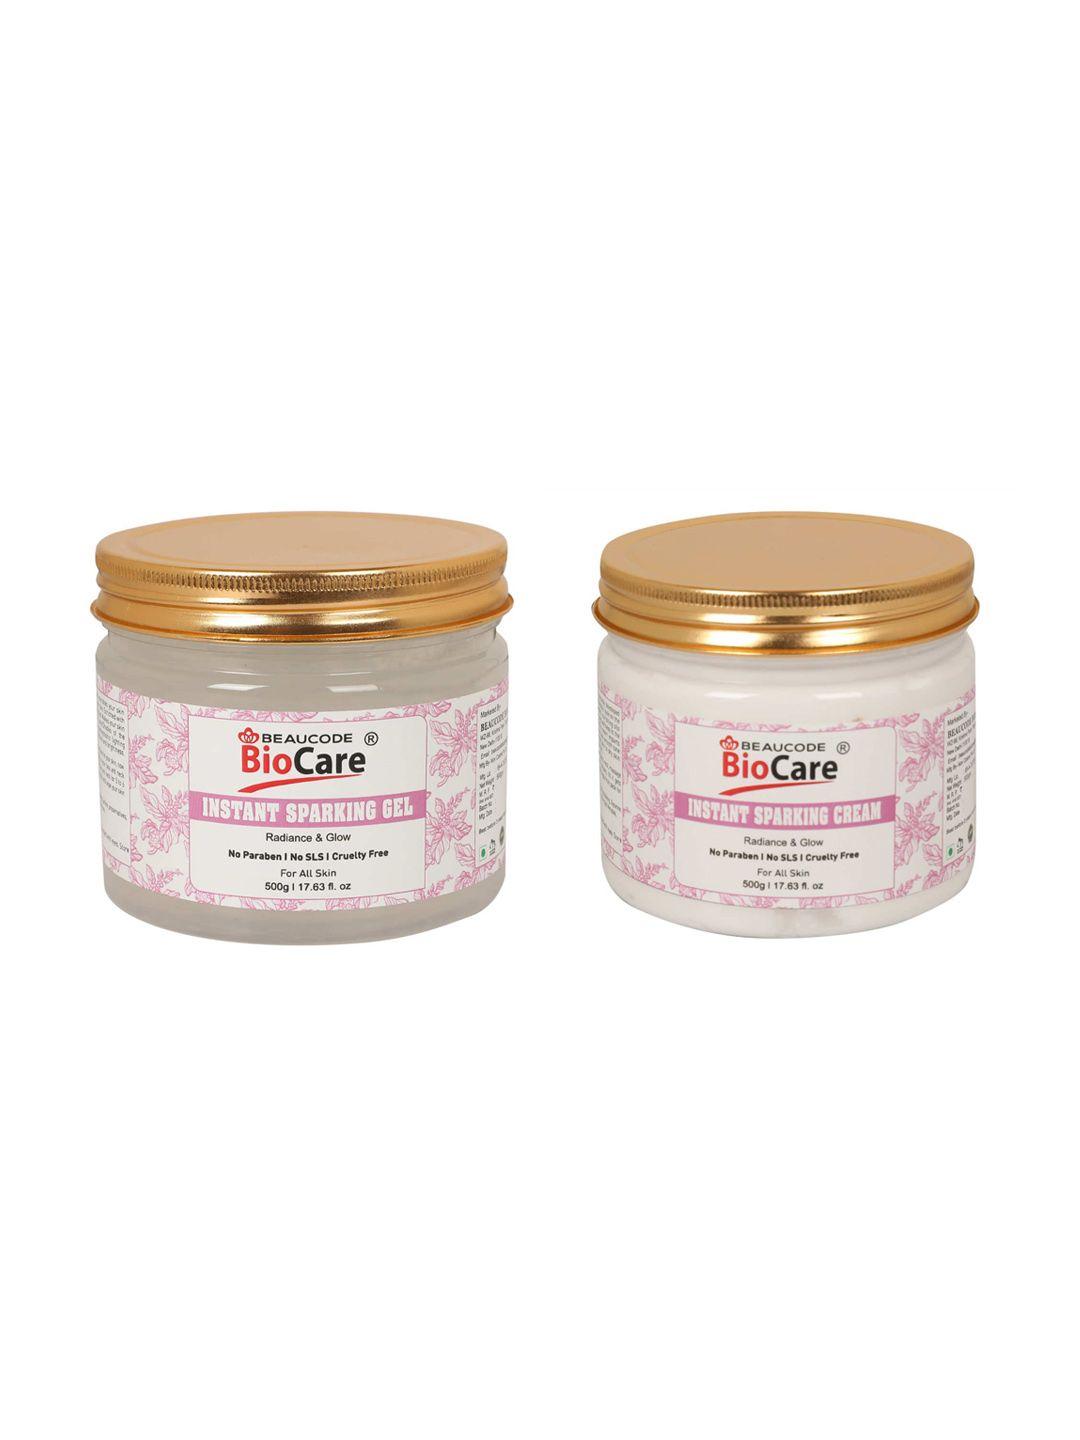 beaucode biocare set of 2 instant sparking face and body cream and gel 1kg